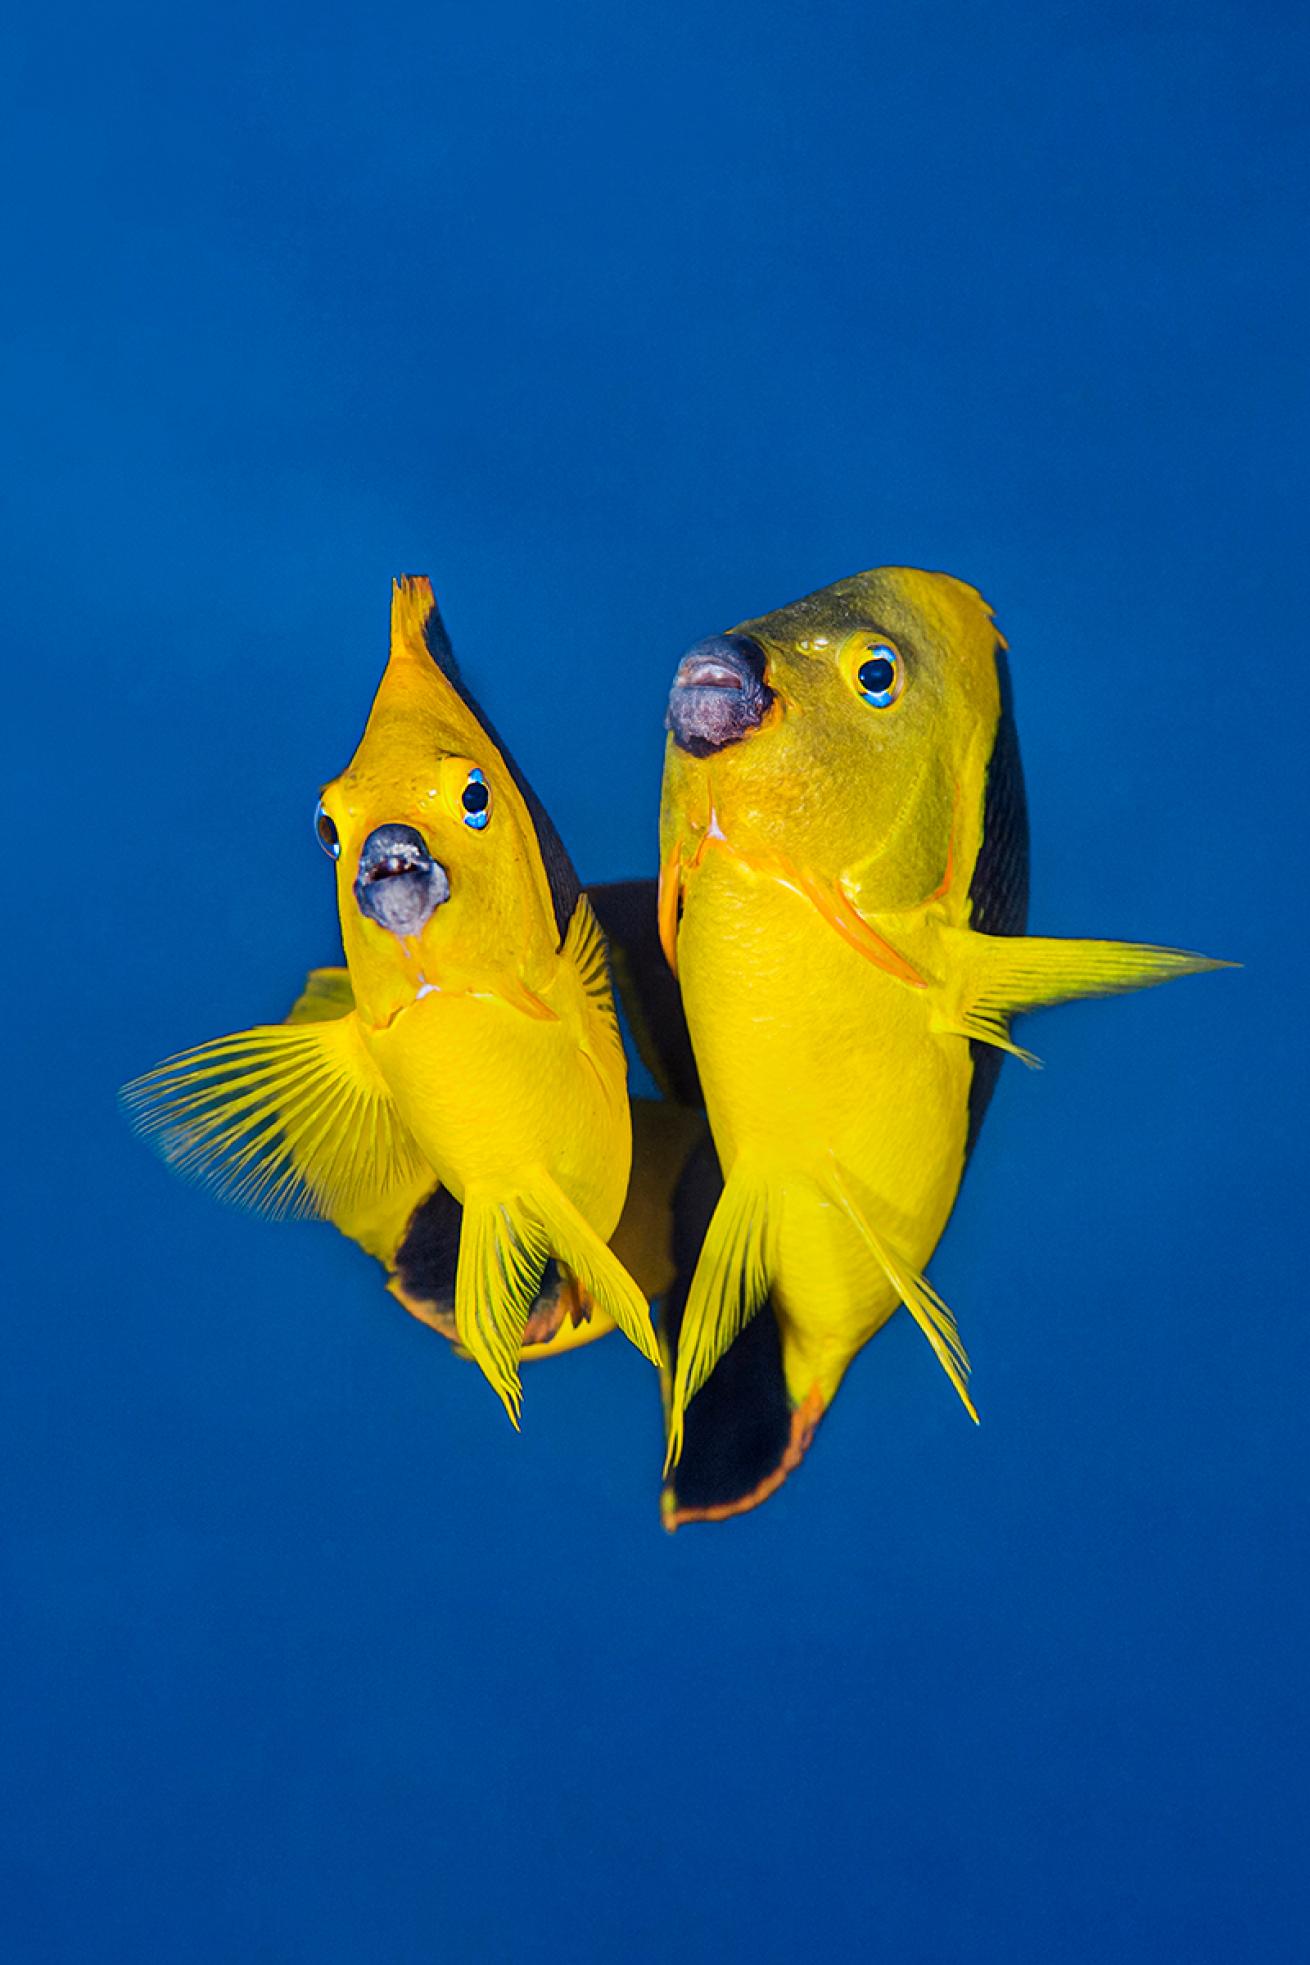 Two yellow and black fish swim next to each other